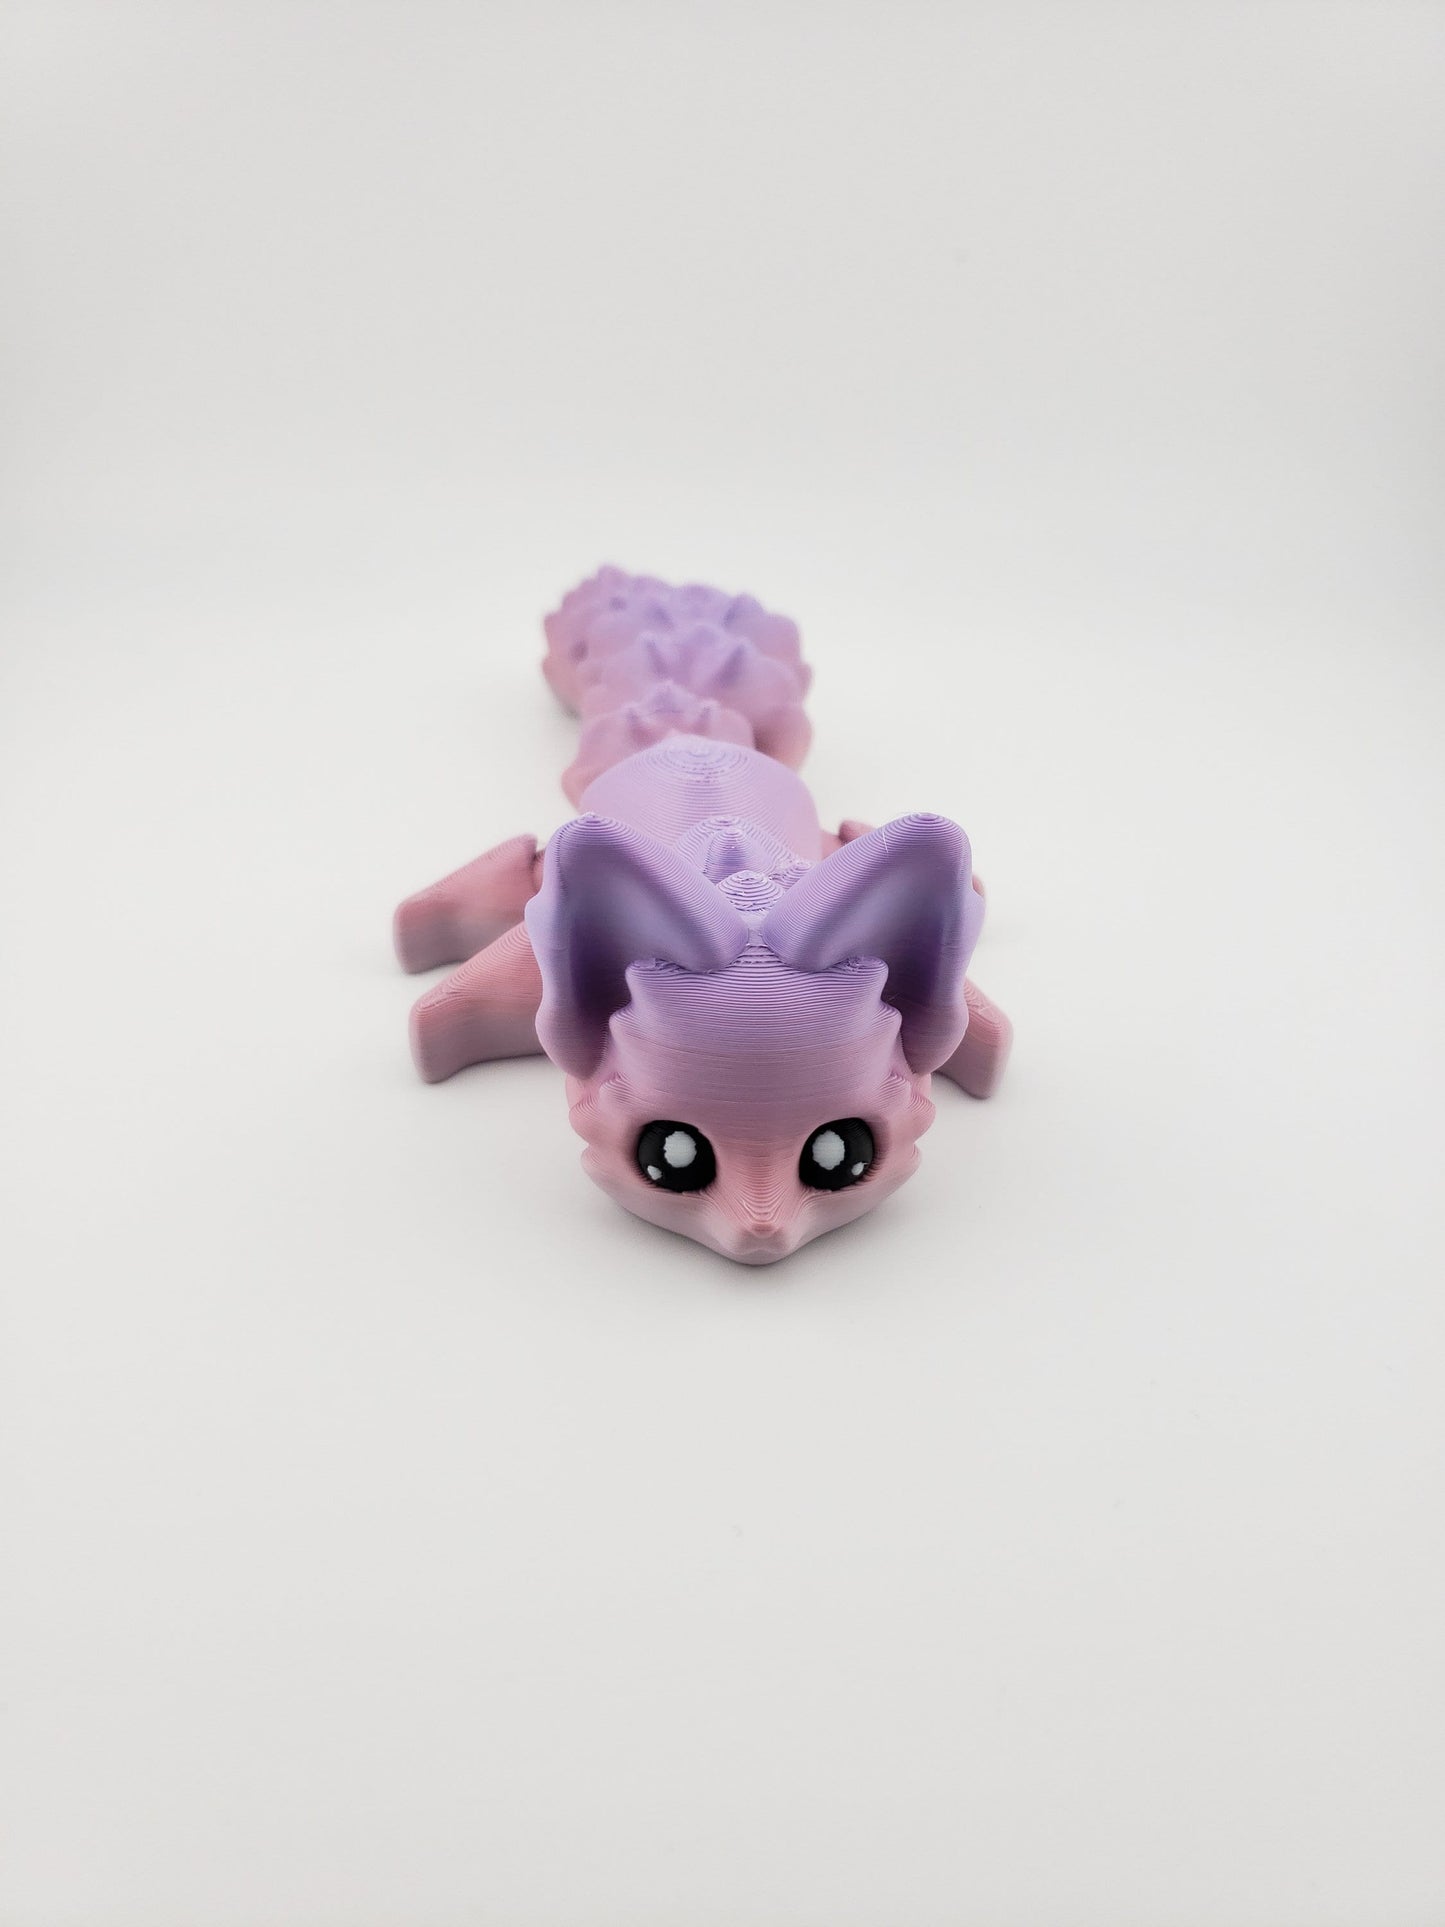 Articulated Cute Flexi Fox 7.5 Inches - 3D Printed Fidget Fantasy - Customizable Colors - Authorized Seller - Articulated Desk Buddy